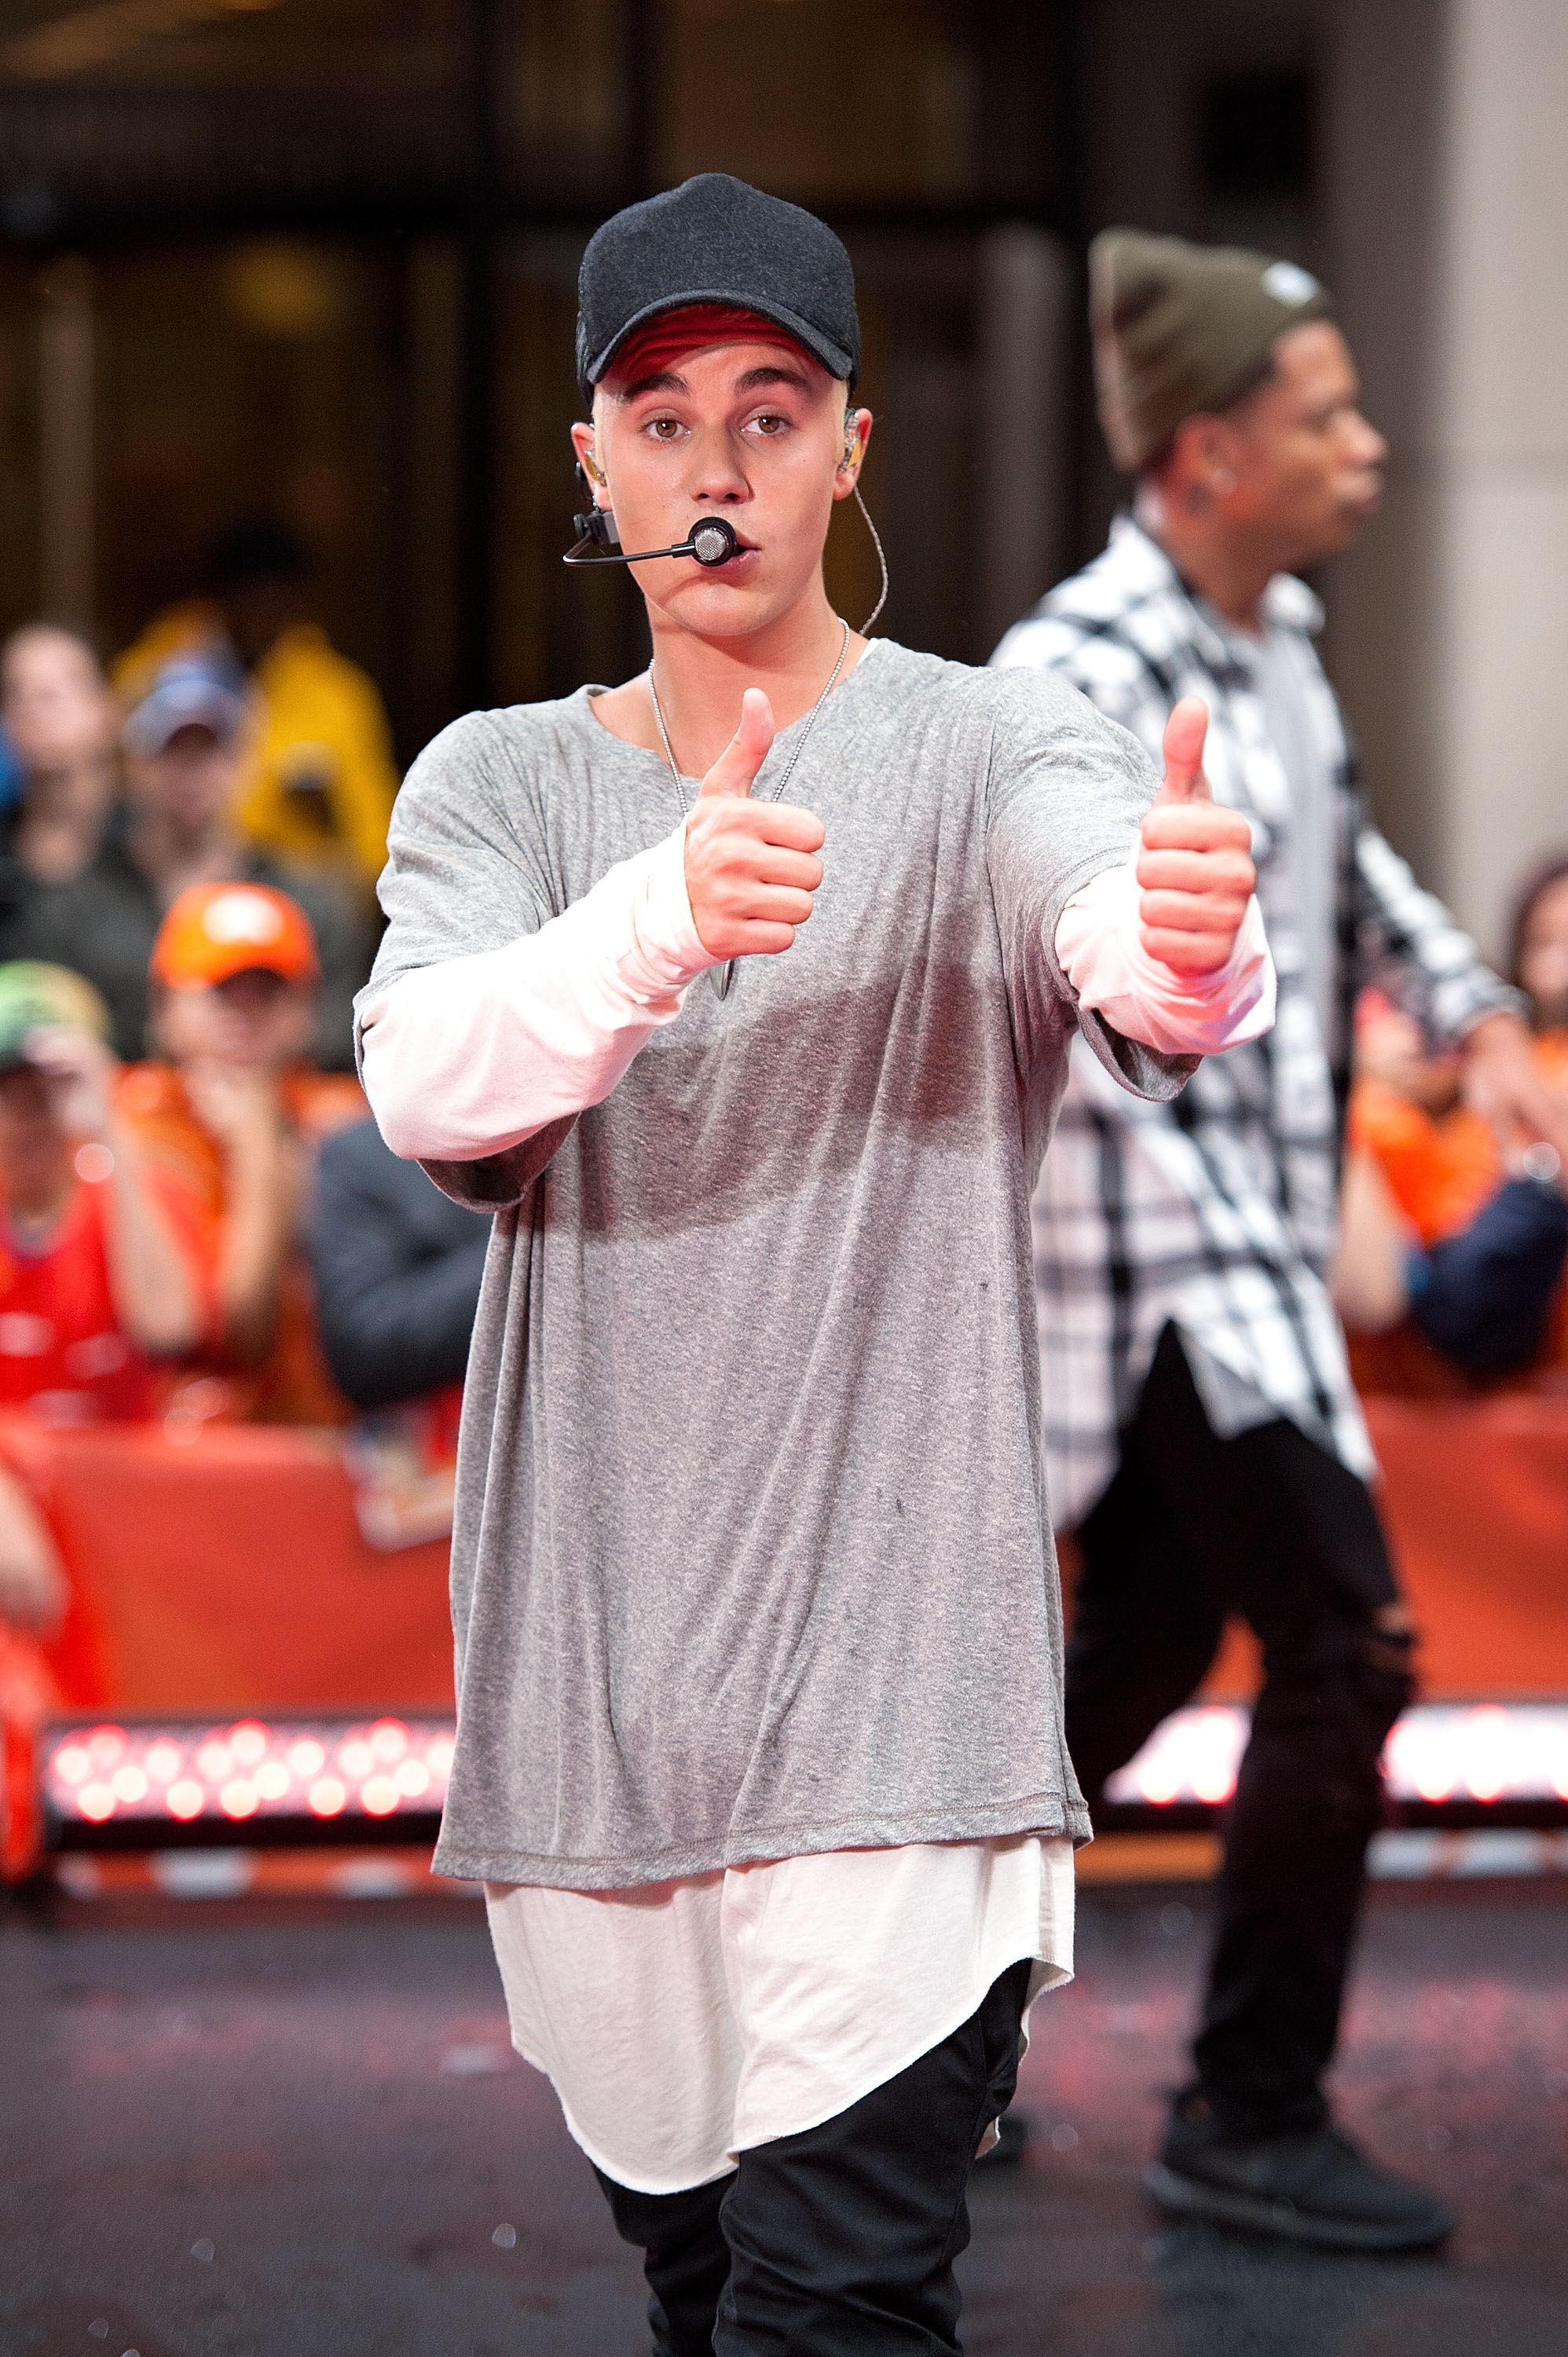 Justin Bieber Opens Think It Up Telecast With "What Do You Mean